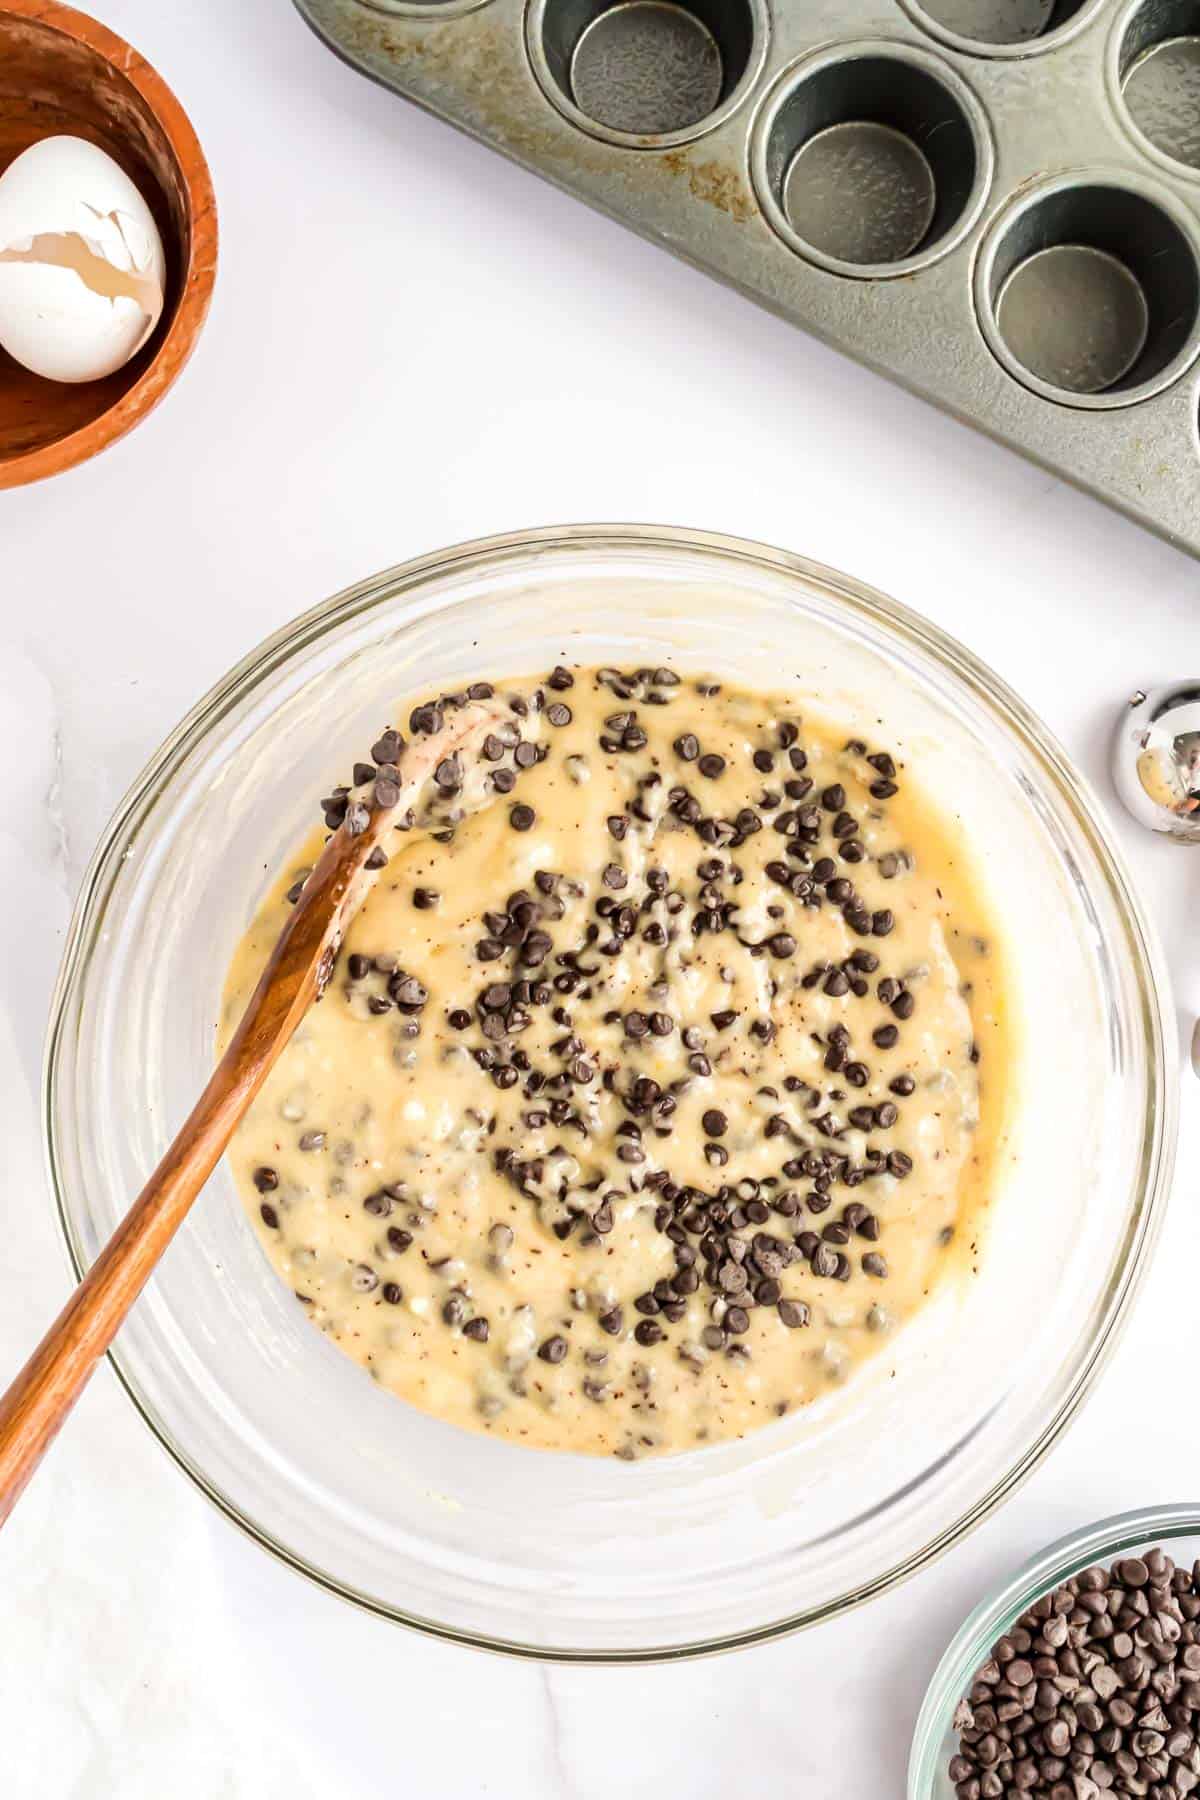 Batter with chocolate chips.